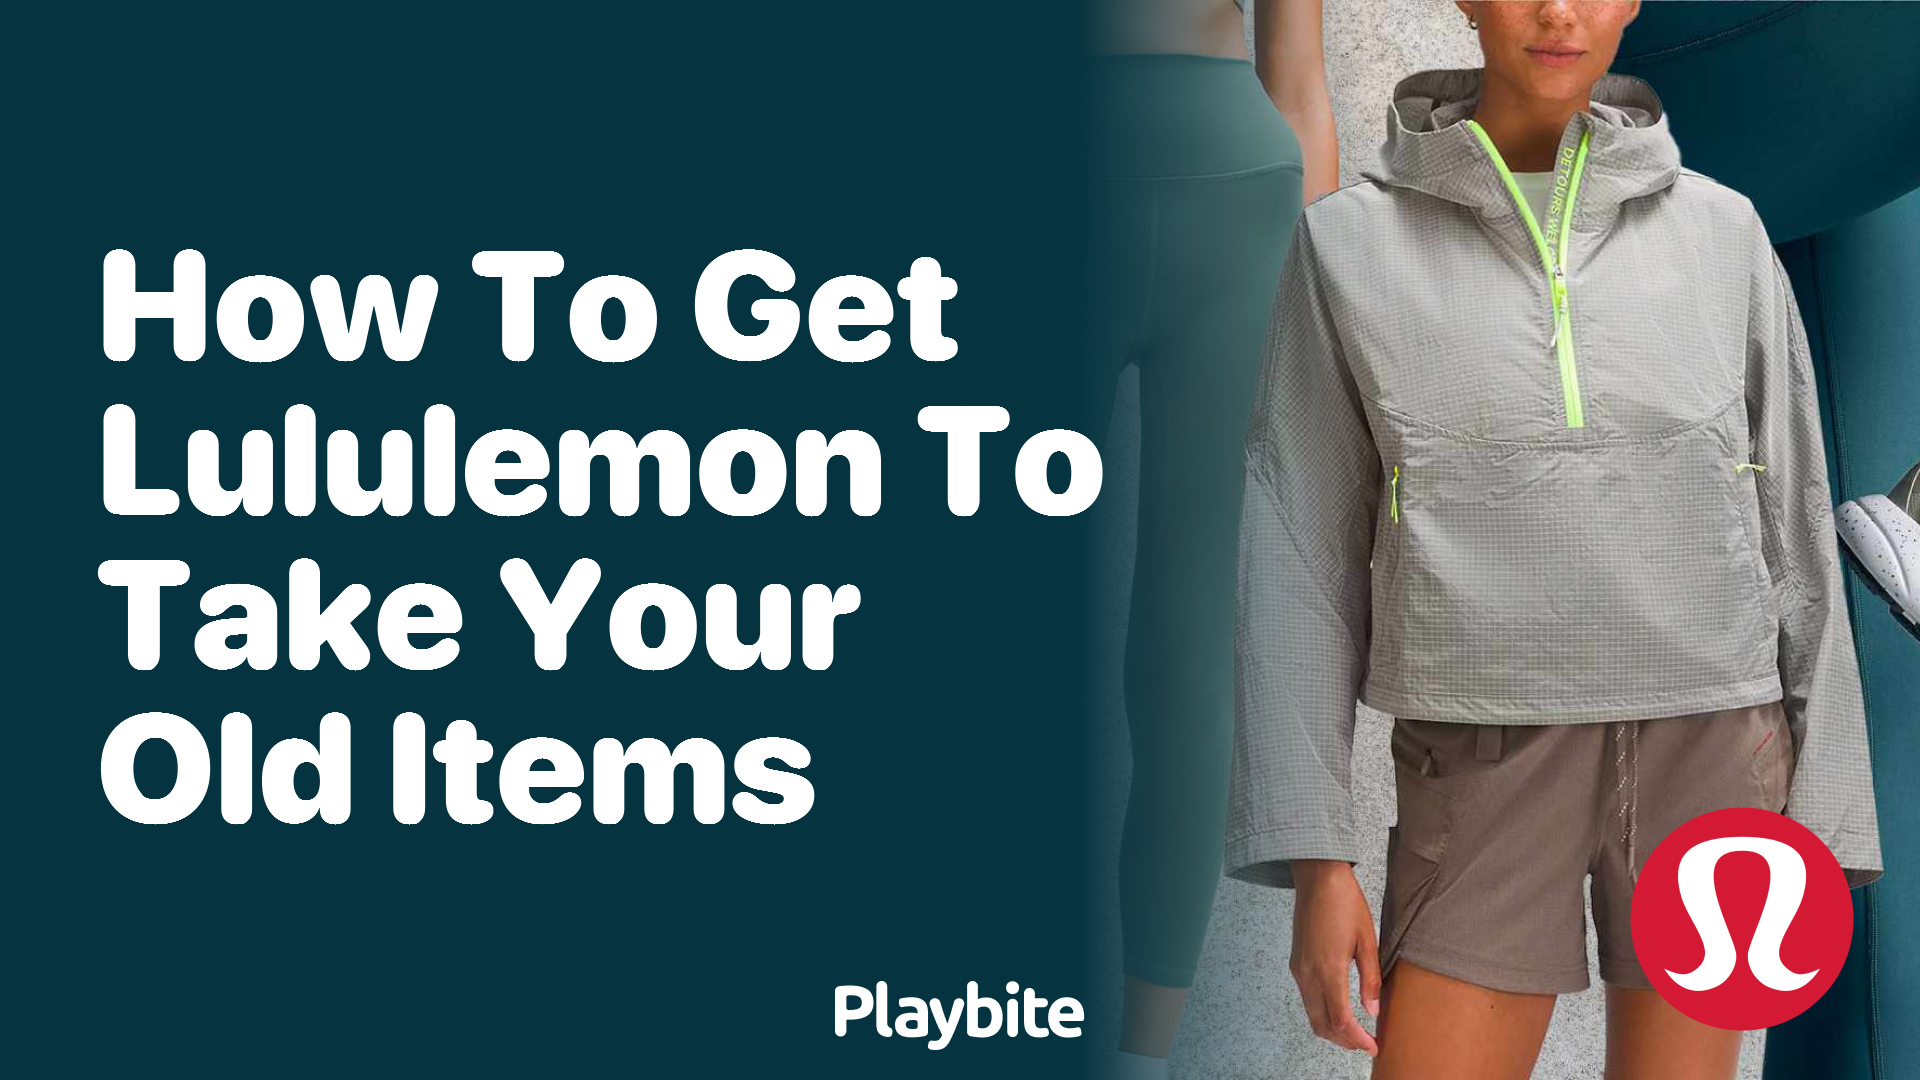 How to Get Lululemon to Take Your Old Items - Playbite